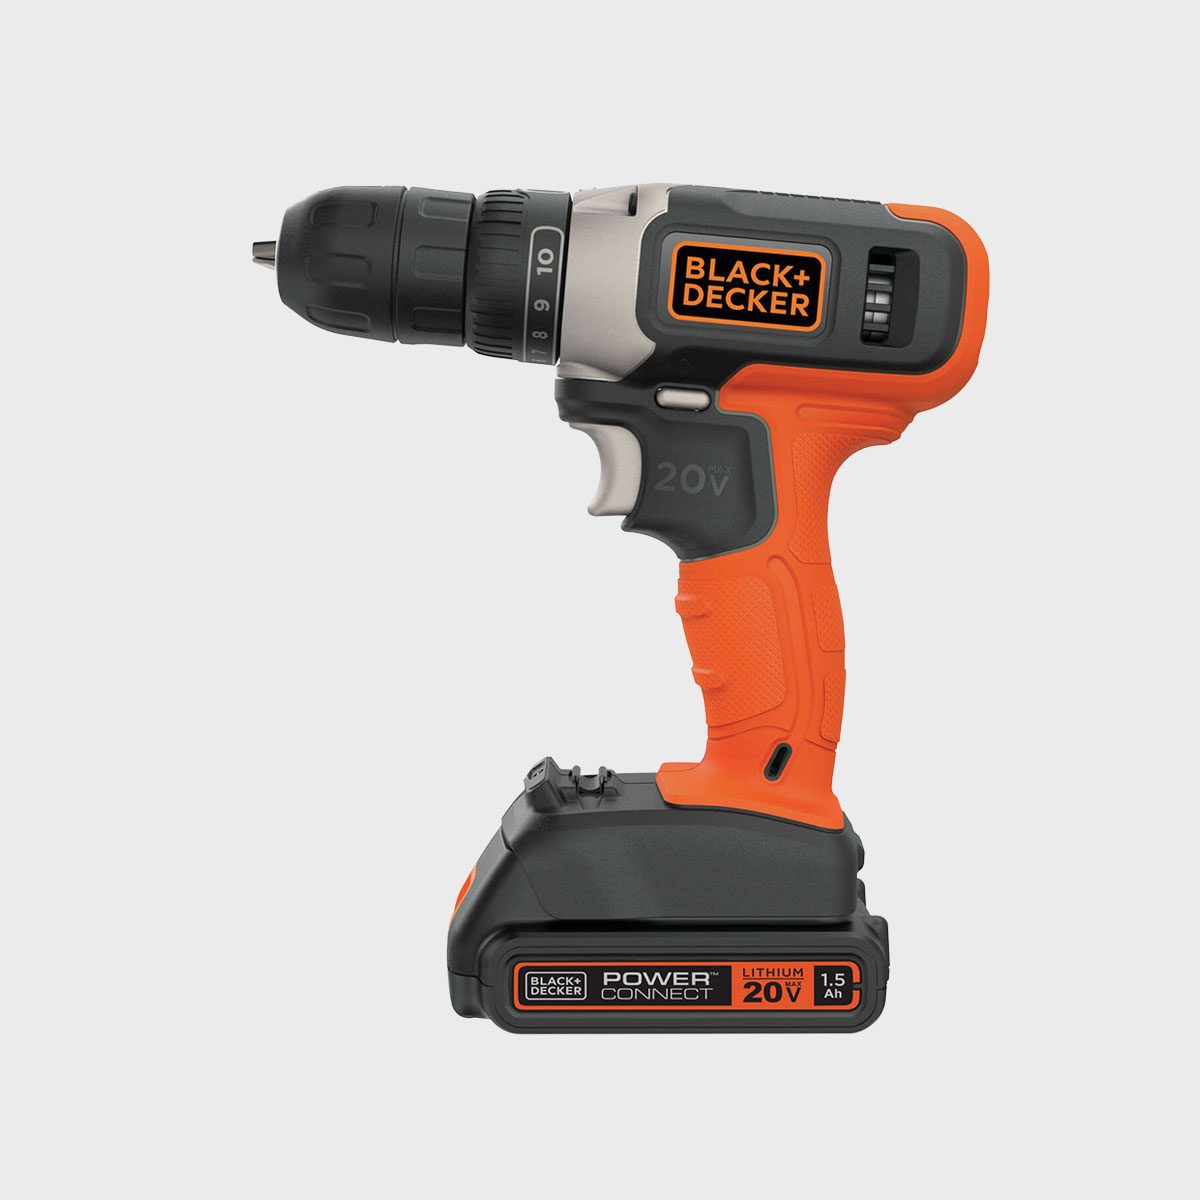 https://www.familyhandyman.com/wp-content/uploads/2022/01/black-and-decker-bdcdd12c-12-volt-max-lithium-ion-cordless-38-drill-with-battery-ecomm-via-homedepot.com_.jpg?fit=700%2C700